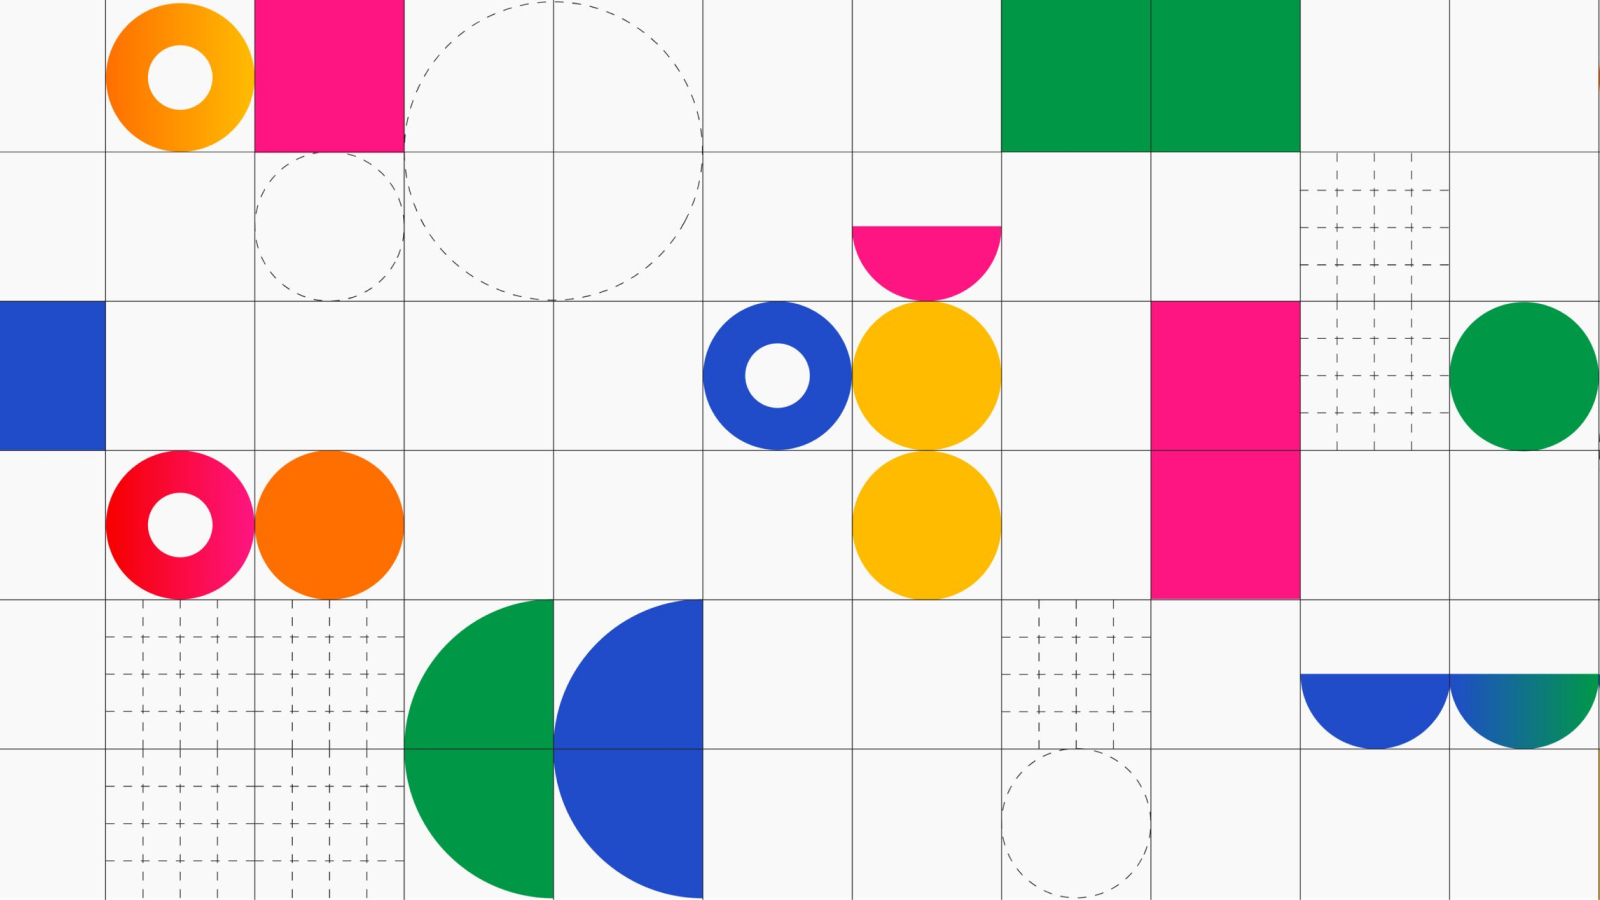 Brightly colored shapes randomly placed on a grid, symbolizing components coming together to create flexible office settings.